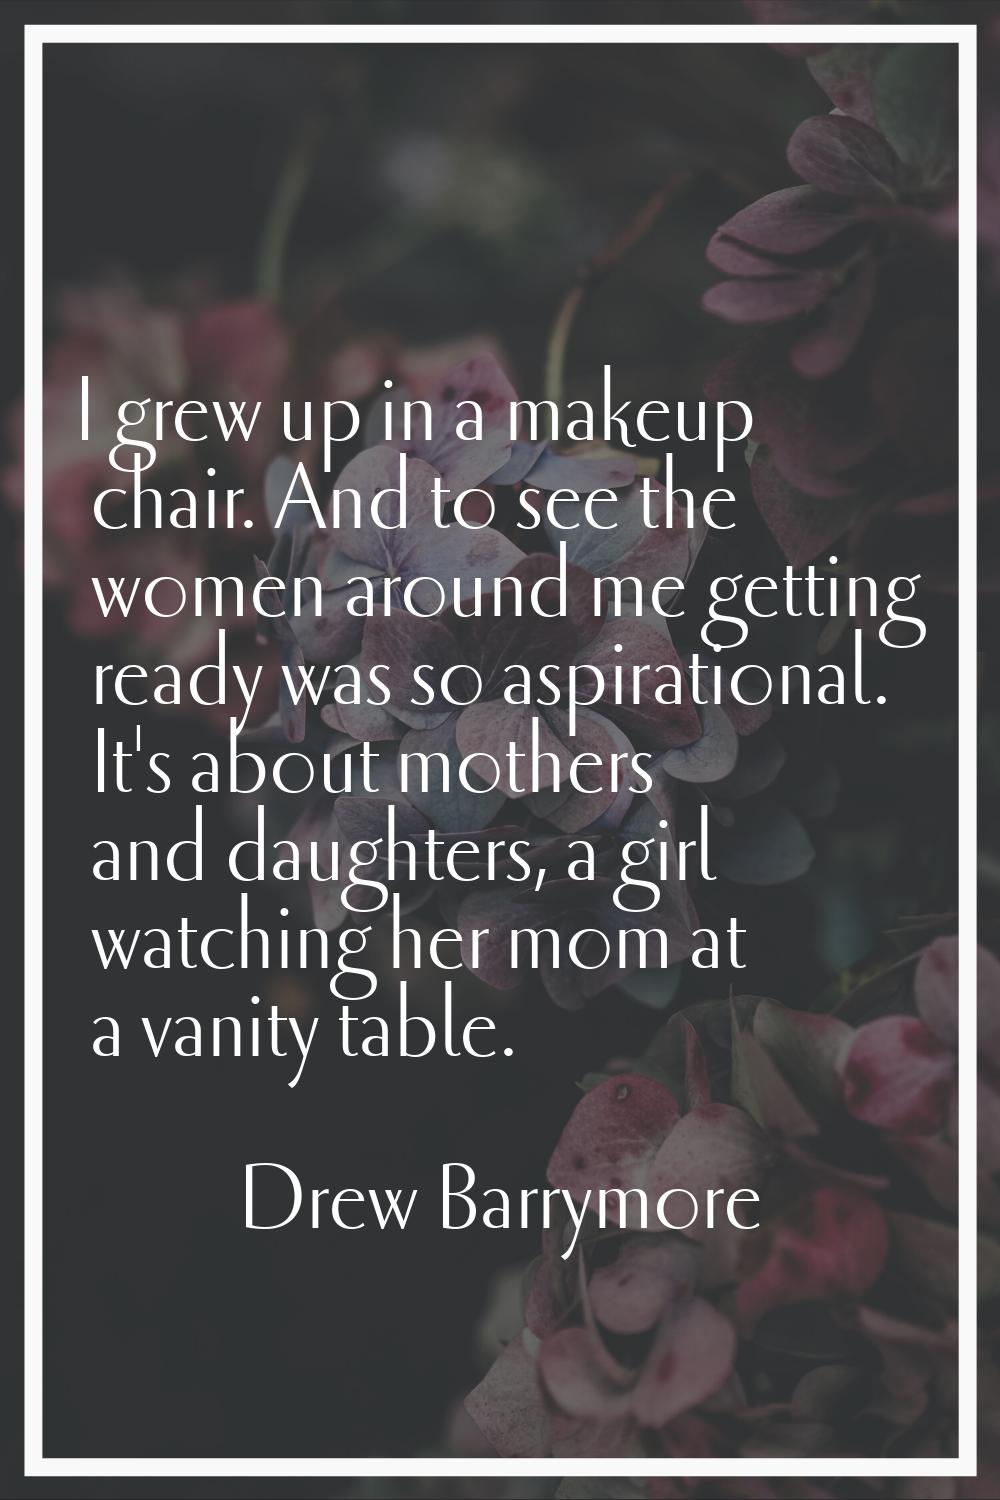 I grew up in a makeup chair. And to see the women around me getting ready was so aspirational. It's